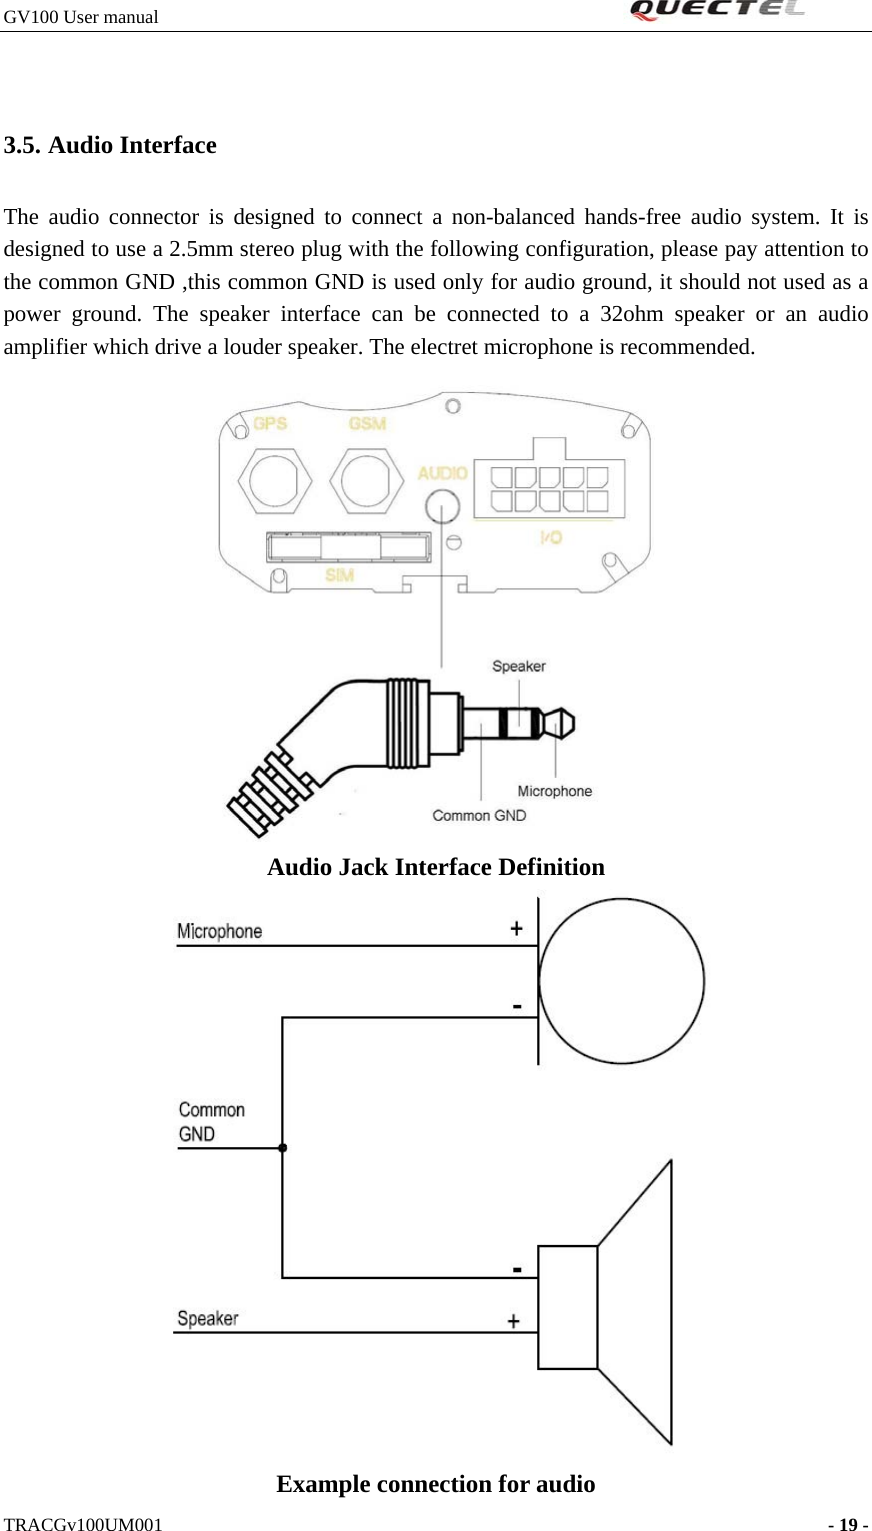 GV100 User manual                                                               3.5. Audio Interface The audio connector is designed to connect a non-balanced hands-free audio system. It is designed to use a 2.5mm stereo plug with the following configuration, please pay attention to the common GND ,this common GND is used only for audio ground, it should not used as a power ground. The speaker interface can be connected to a 32ohm speaker or an audio amplifier which drive a louder speaker. The electret microphone is recommended.  Audio Jack Interface Definition    Example connection for audio TRACGv100UM001                                                                    - 19 -   